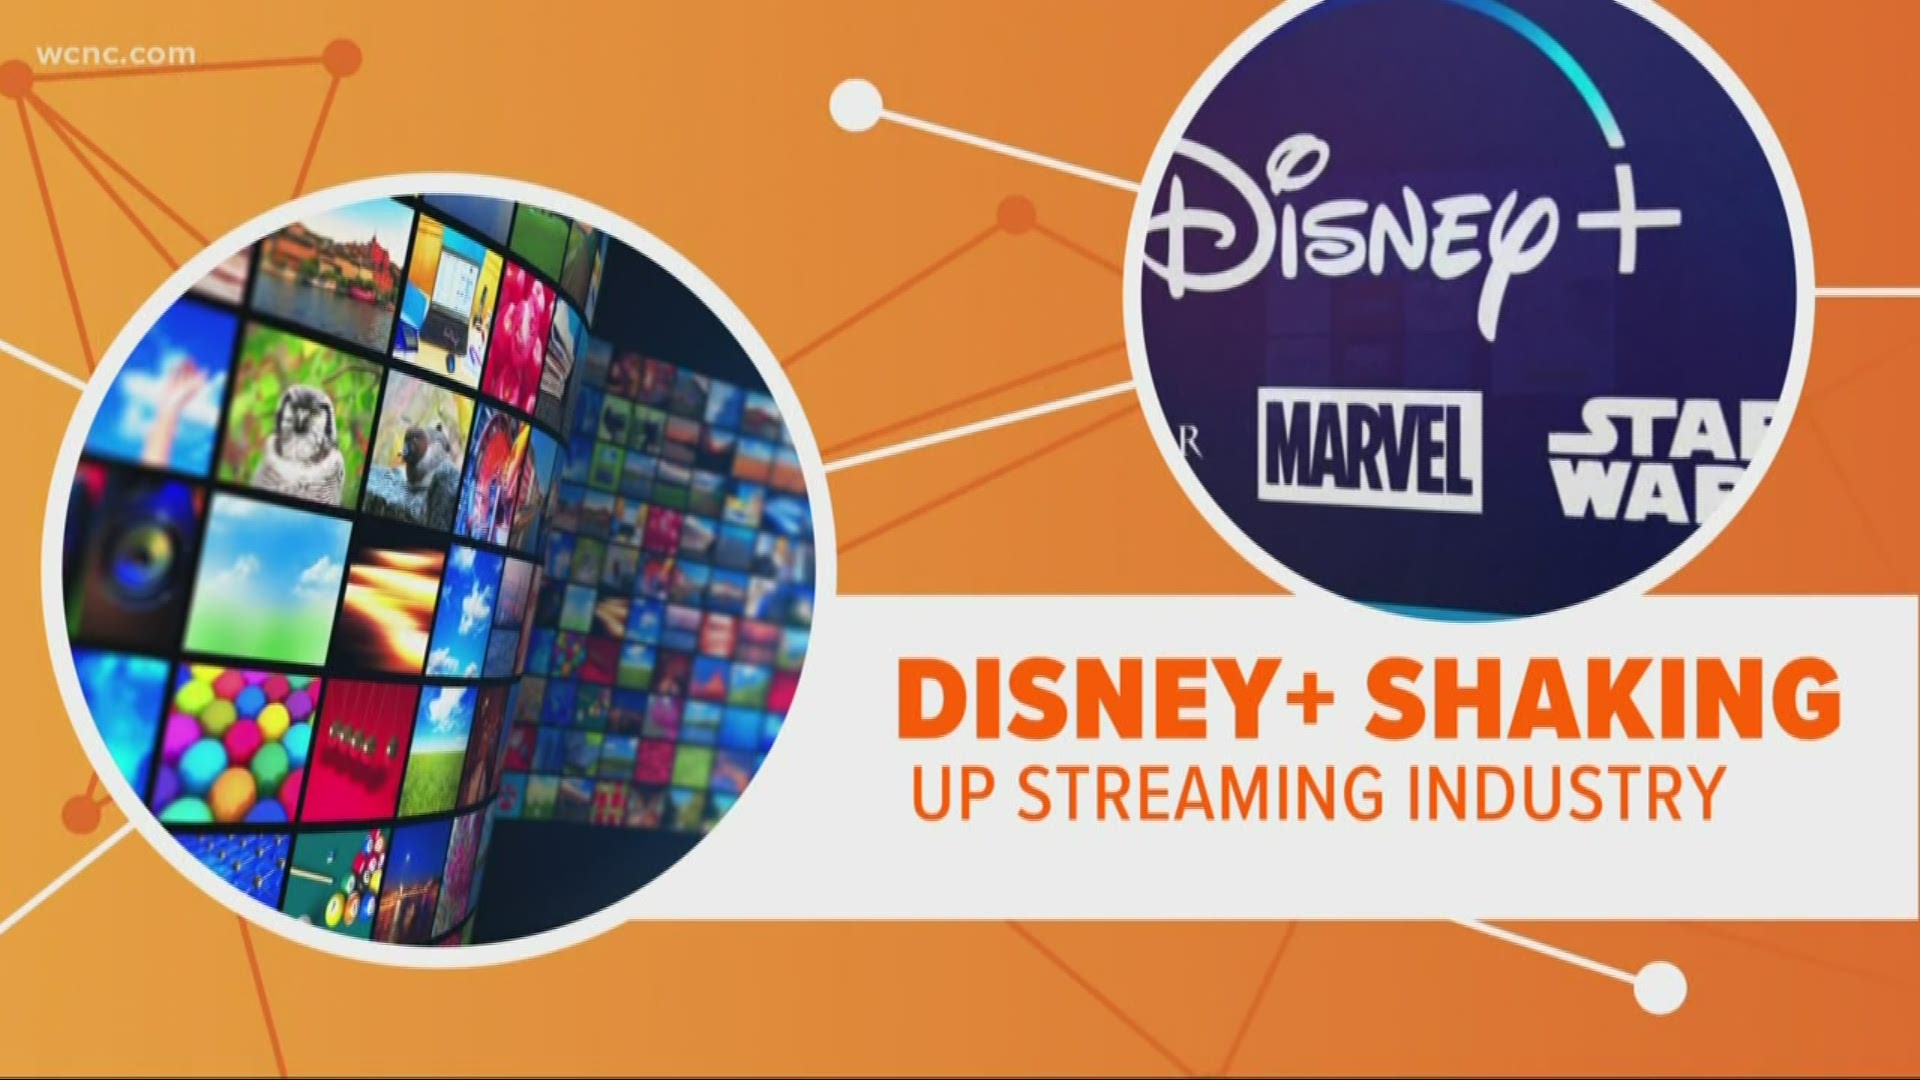 Disney+ launched Tuesday and it's already shaking up the streaming industry, putting major pressure on Netflix.